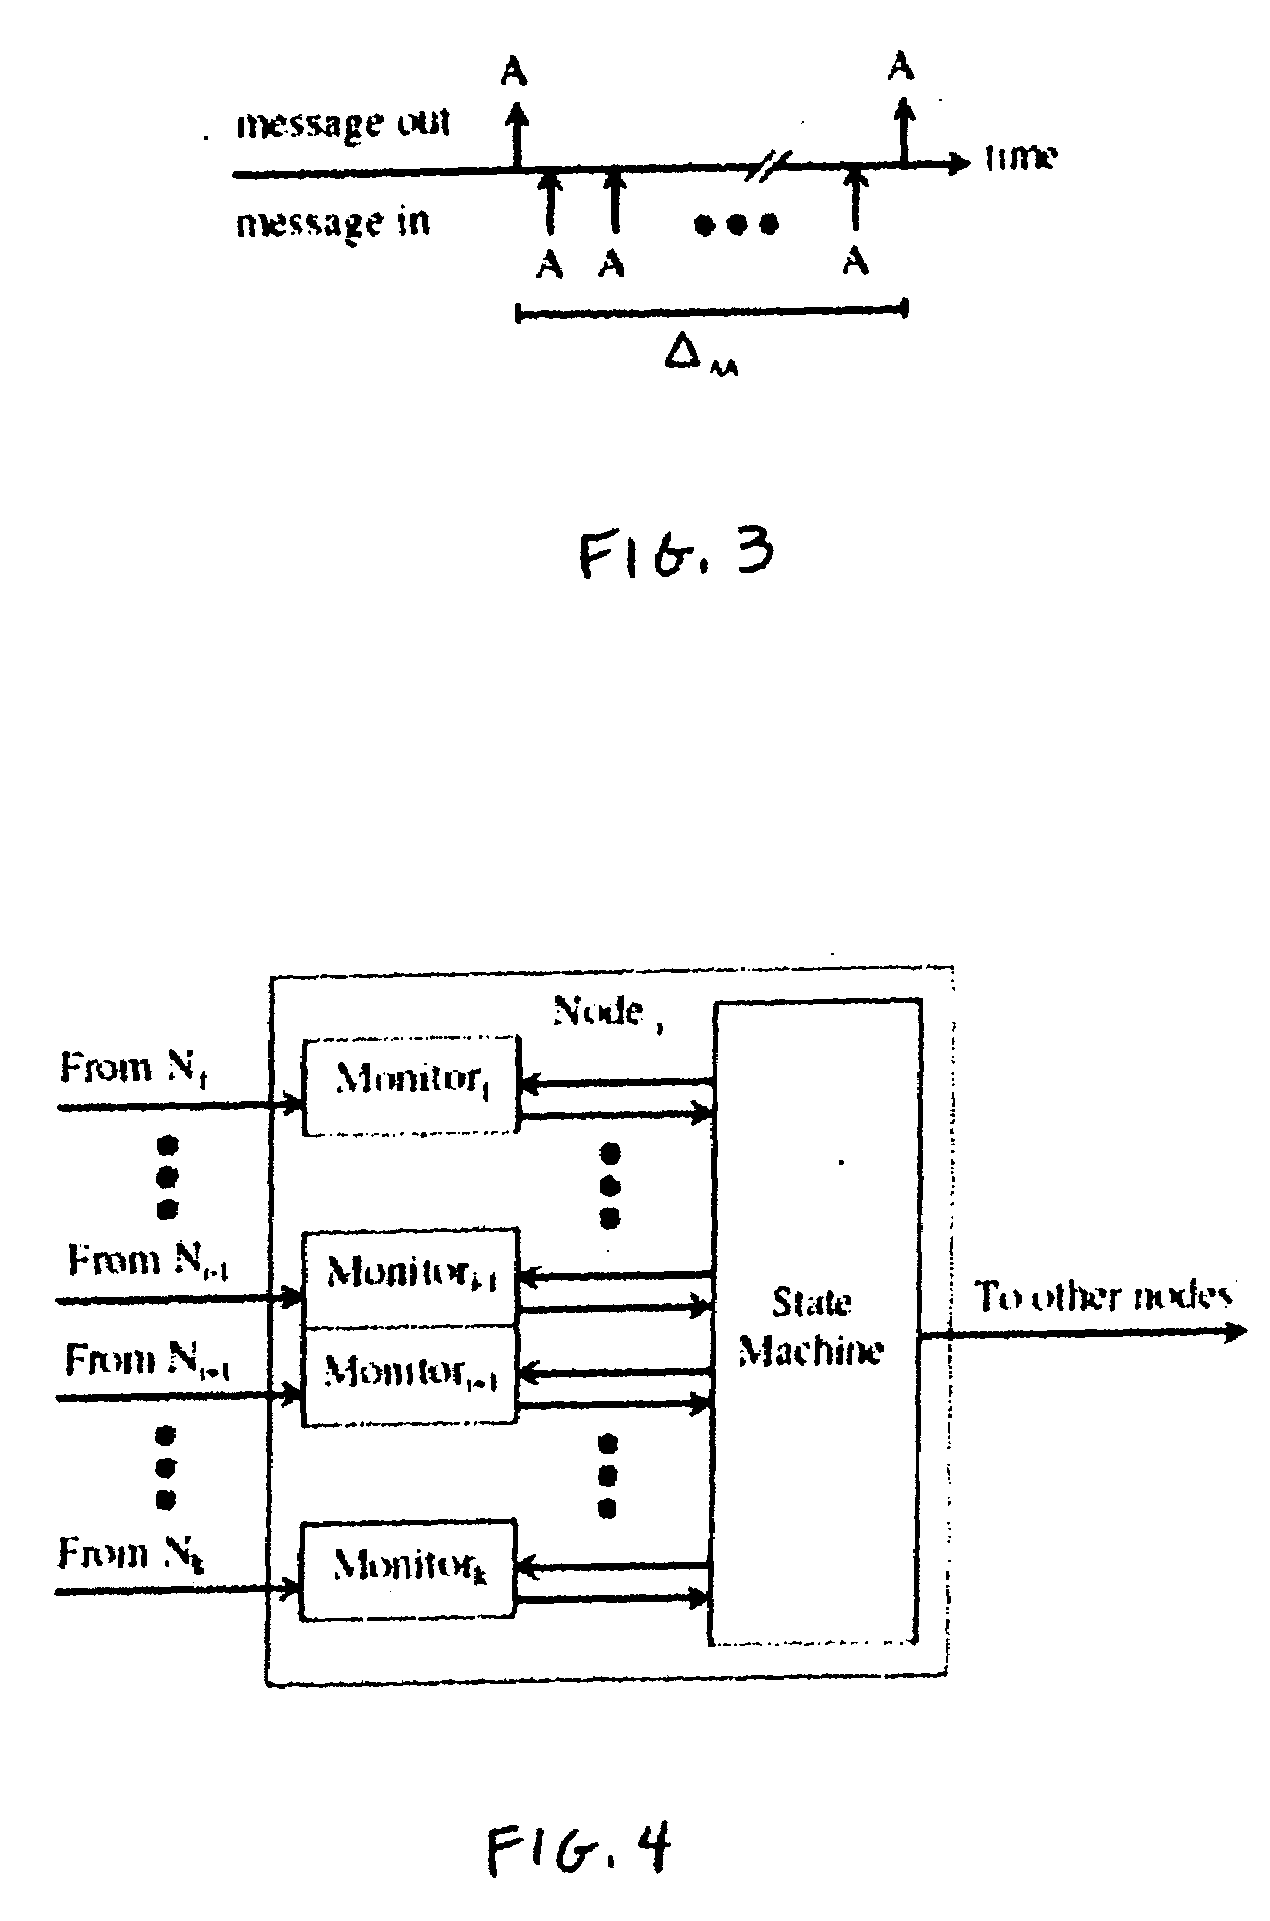 Byzantine-Fault Tolerant Self-Stabilizing Protocol for Distributed Clock Synchronization Systems